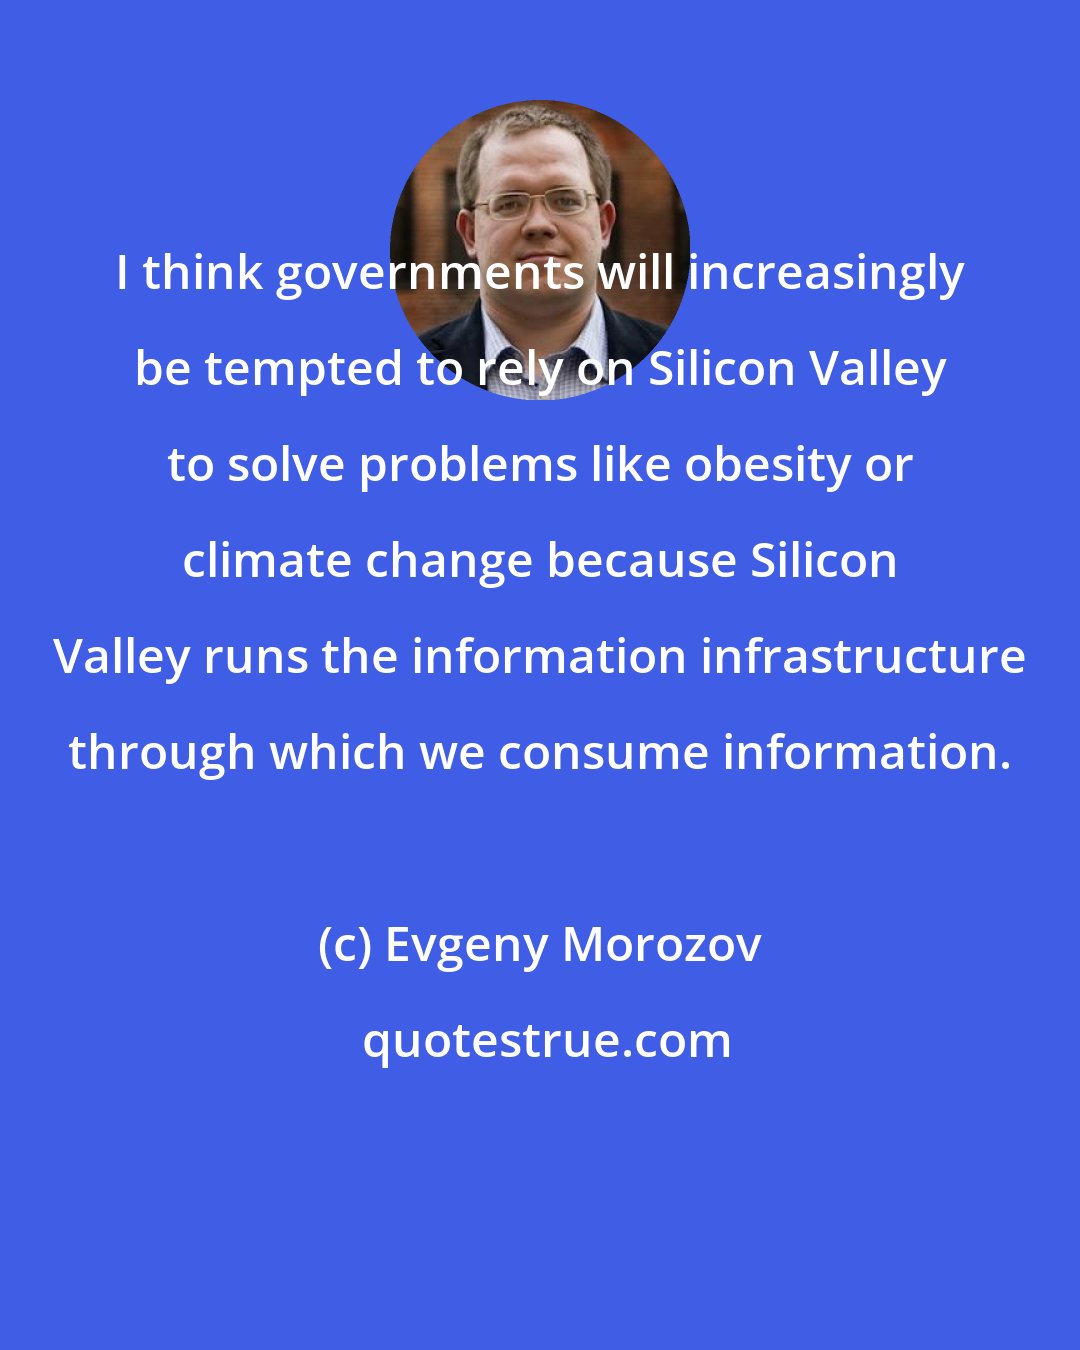 Evgeny Morozov: I think governments will increasingly be tempted to rely on Silicon Valley to solve problems like obesity or climate change because Silicon Valley runs the information infrastructure through which we consume information.